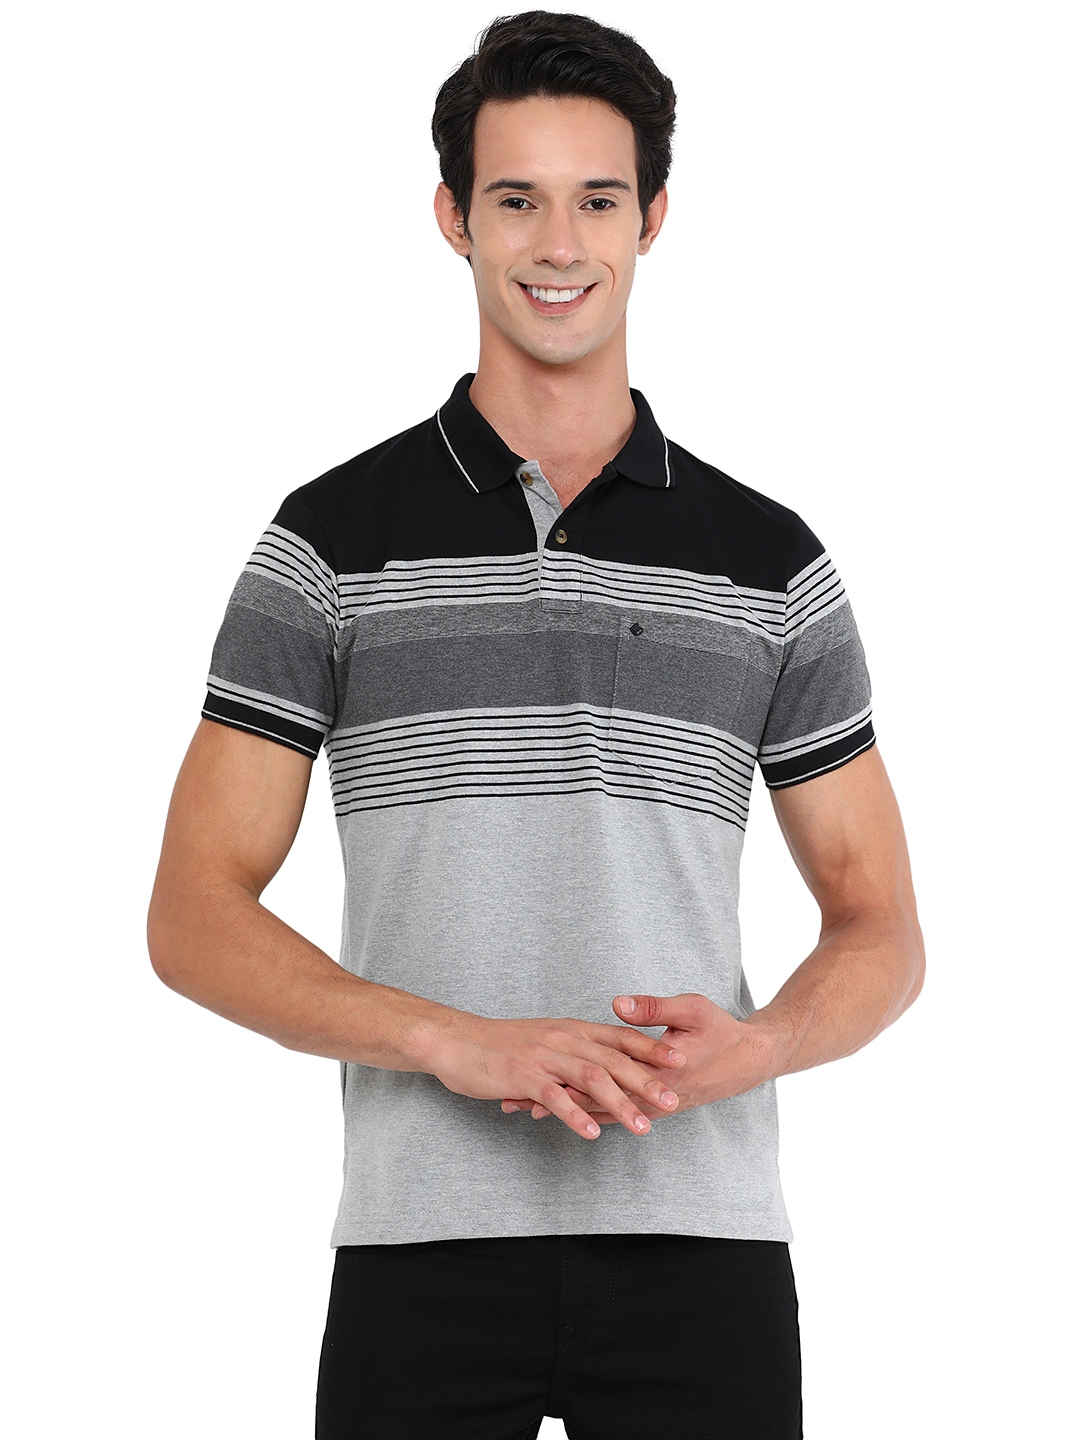 Greenfibre | Caster Grey Striped Slim Fit Polo T-Shirt | Greenfibre 0